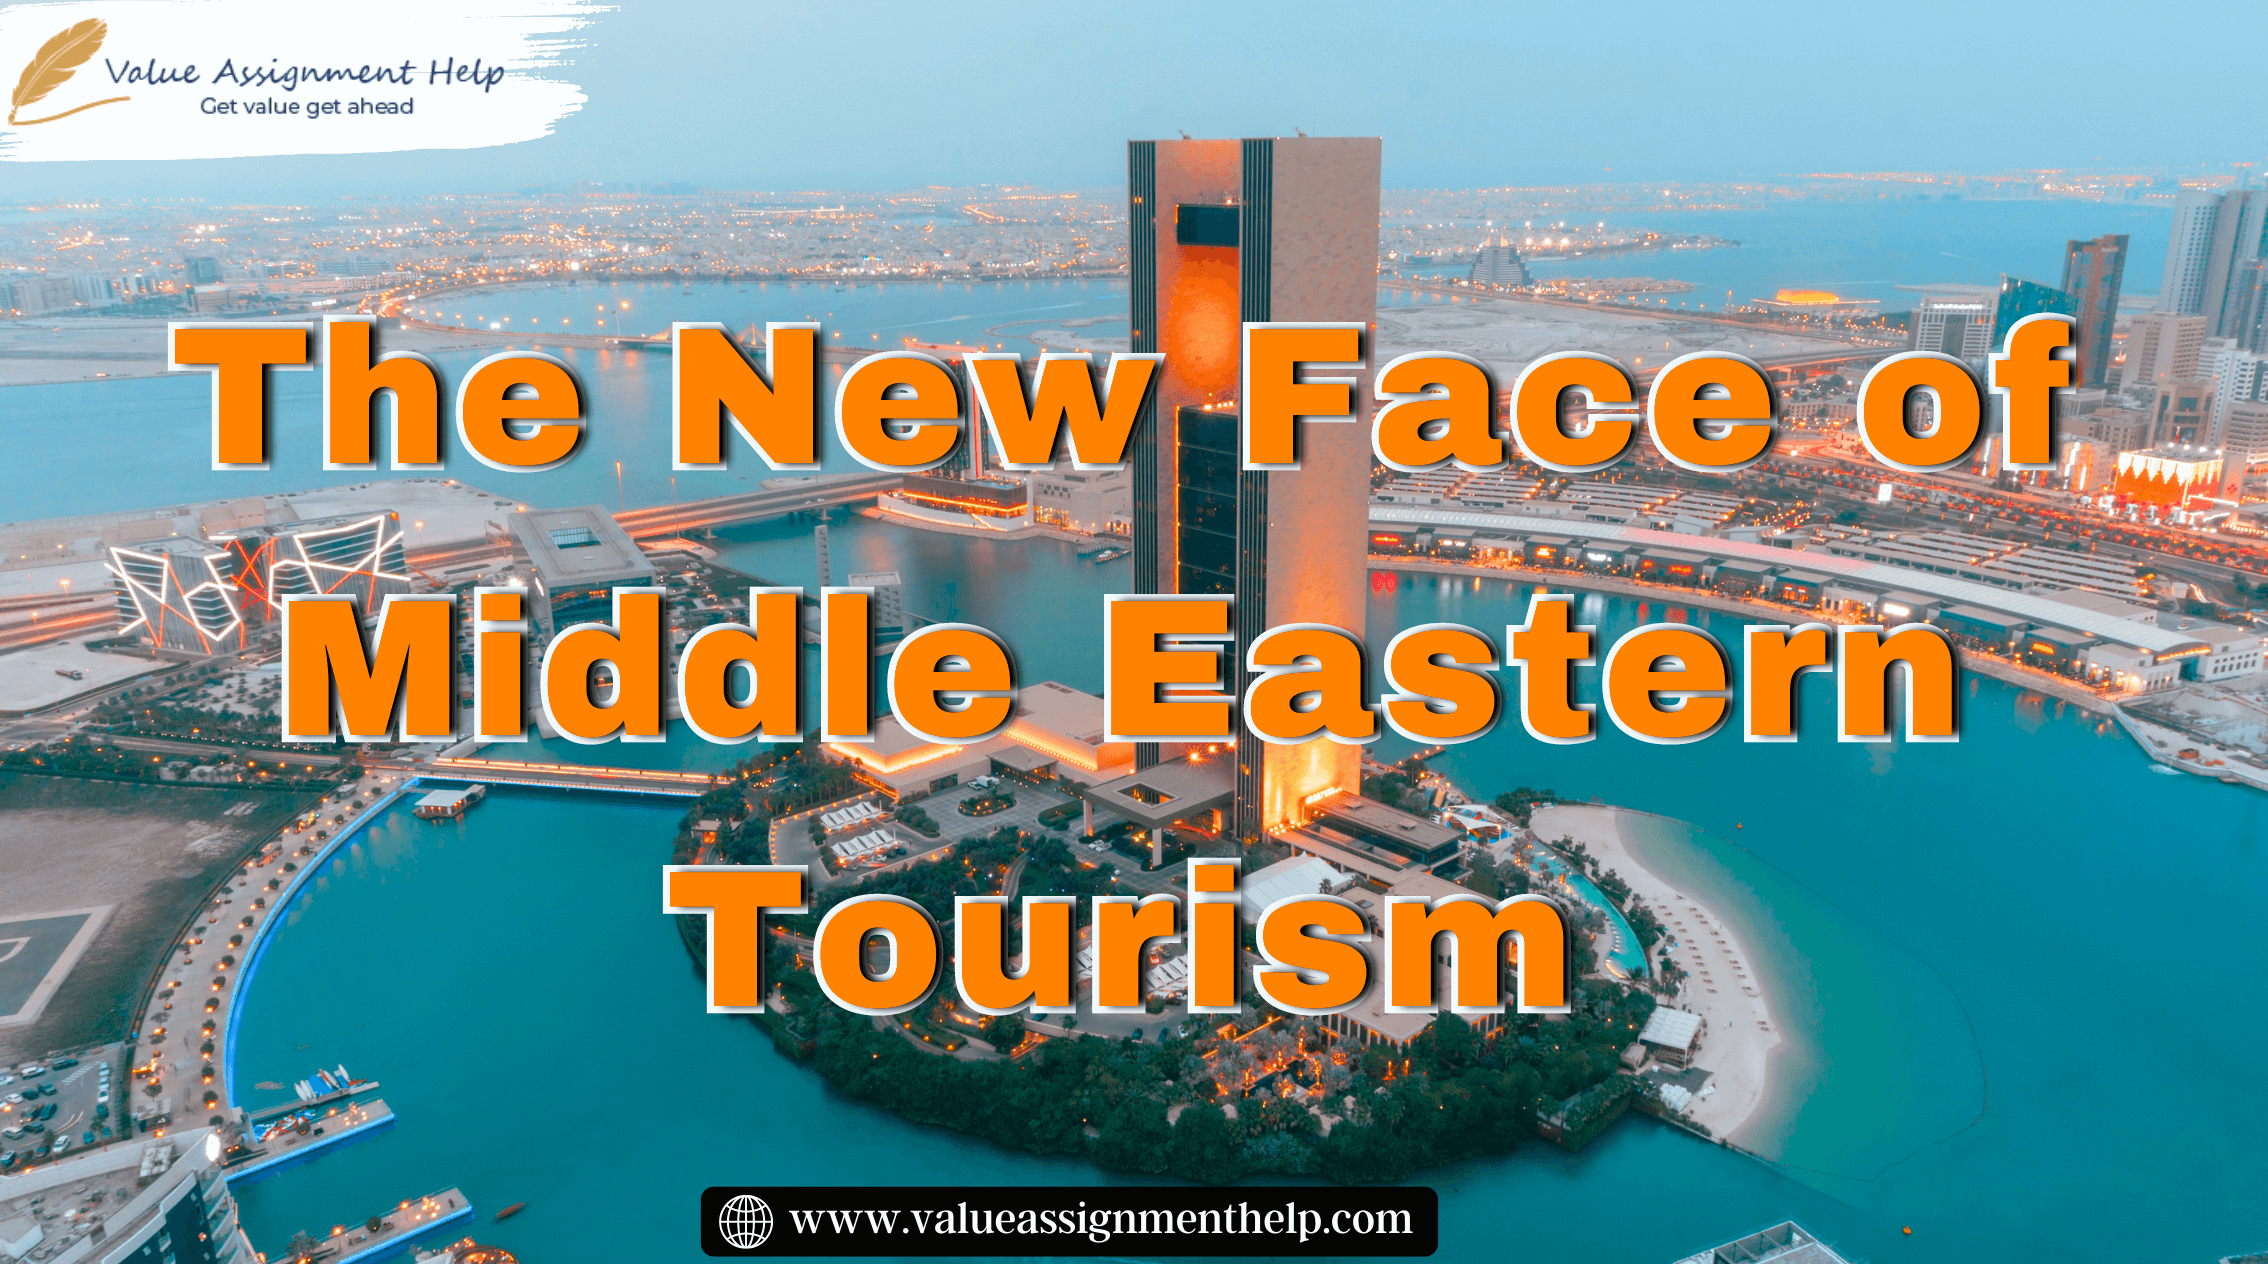  The New Face of Middle Eastern Tourism